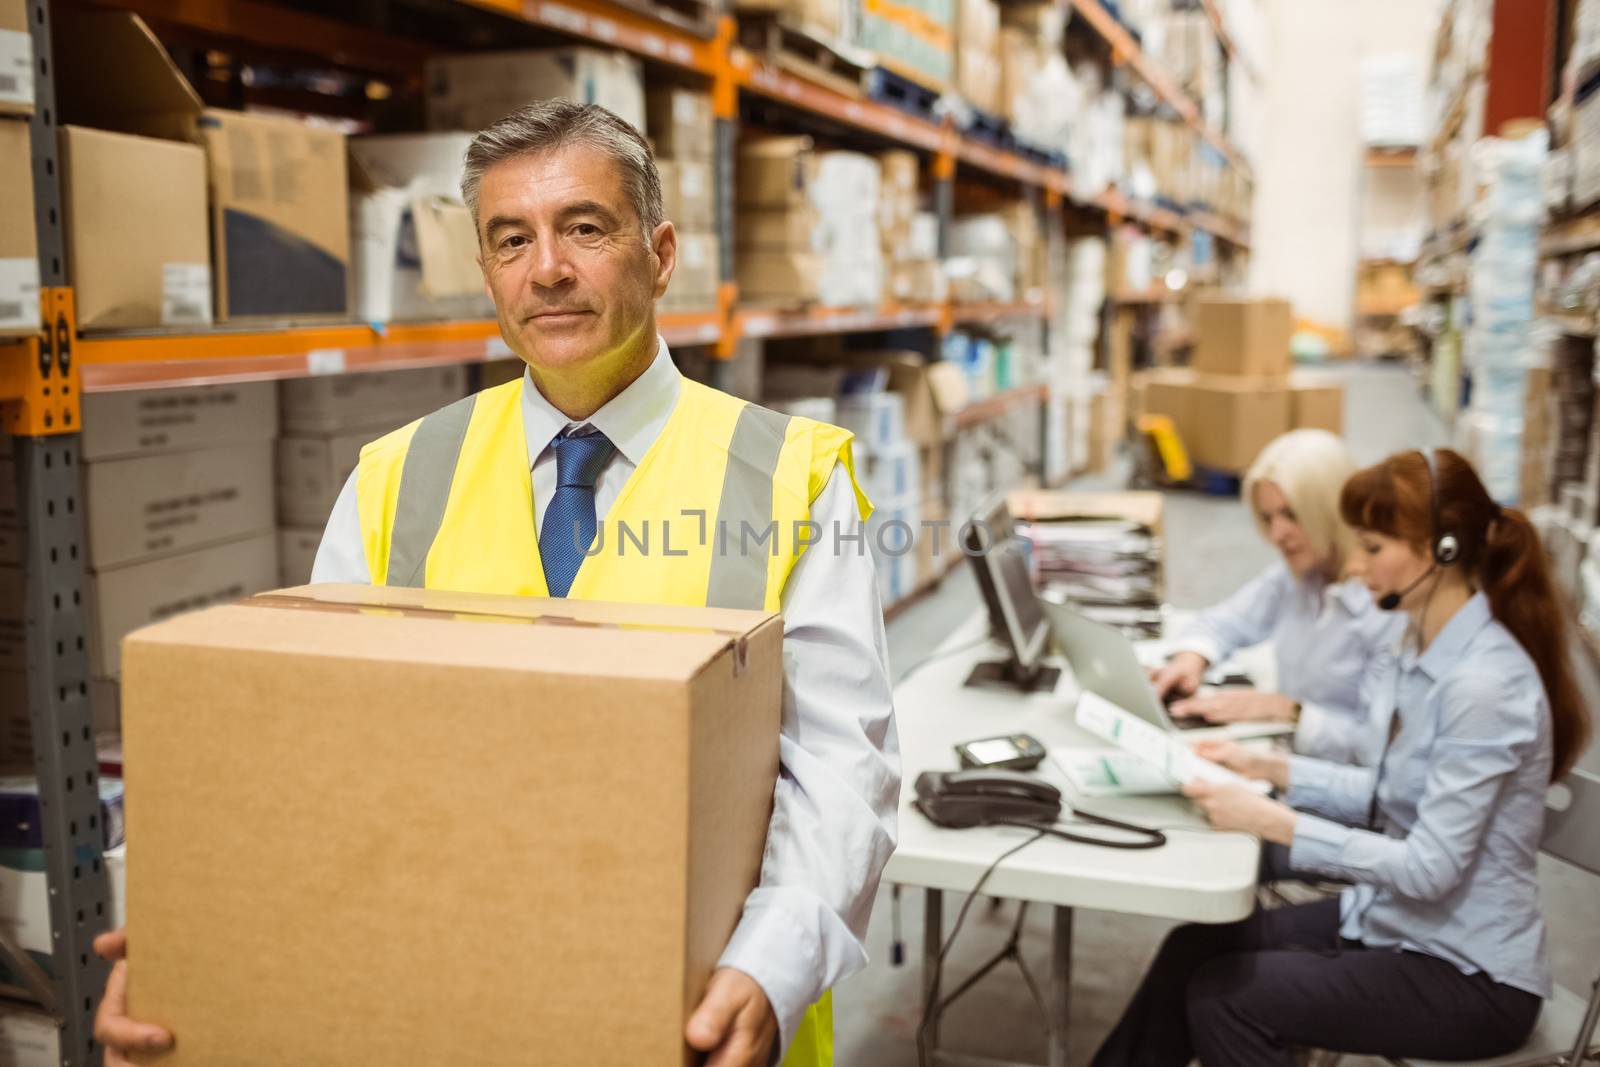 Warehouse manager smiling at camera carrying a box in a large warehouse